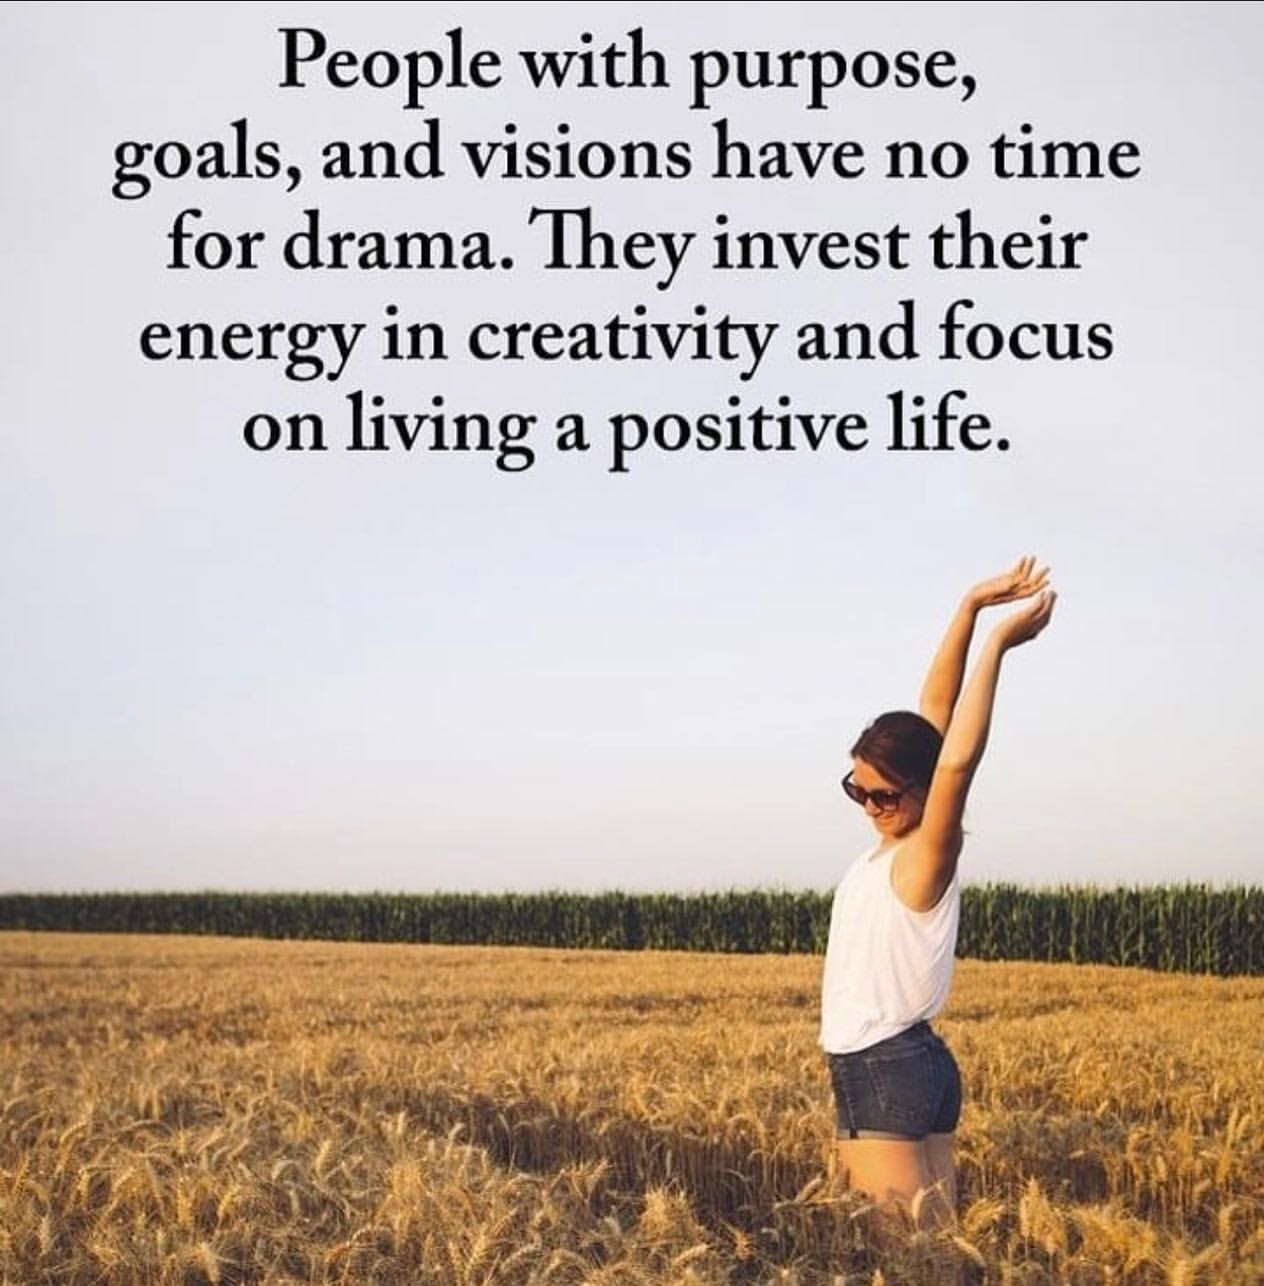 People with purpose, goals, and visions have no time for drama. Invest their energy in creativity and focus on living a positive life.